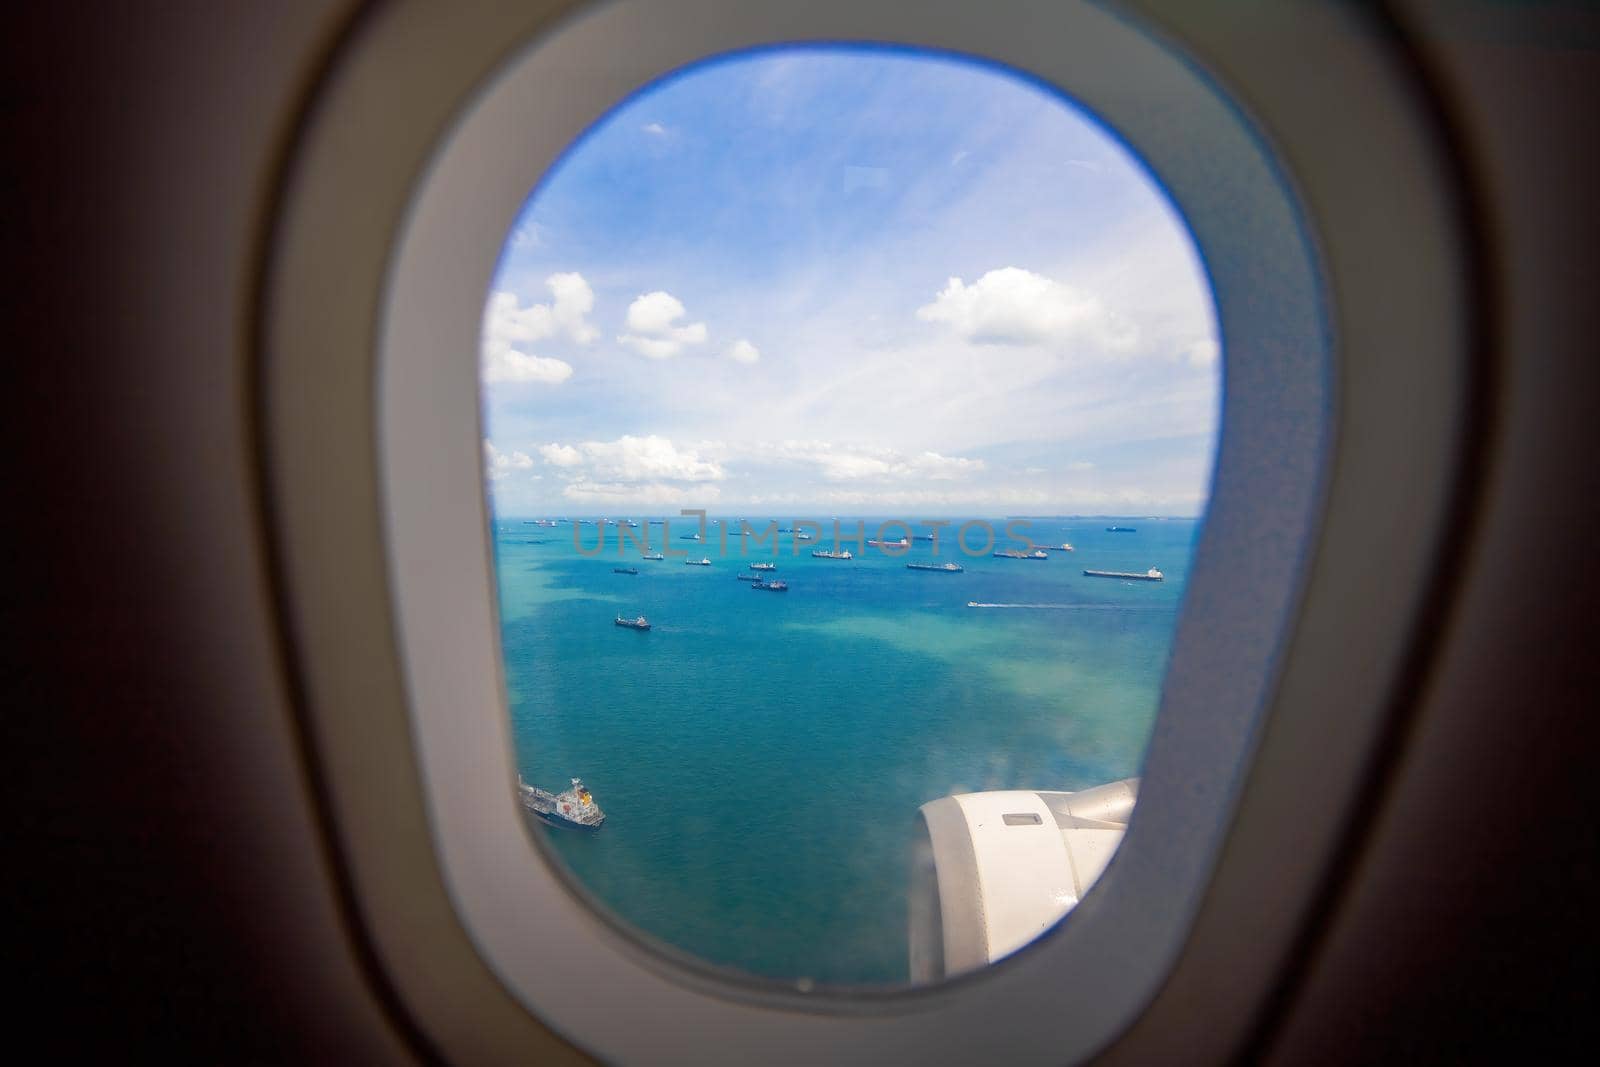 beautiful view from the window of the plane to the sea and cargo ships. carefree view from porthole landing airplane